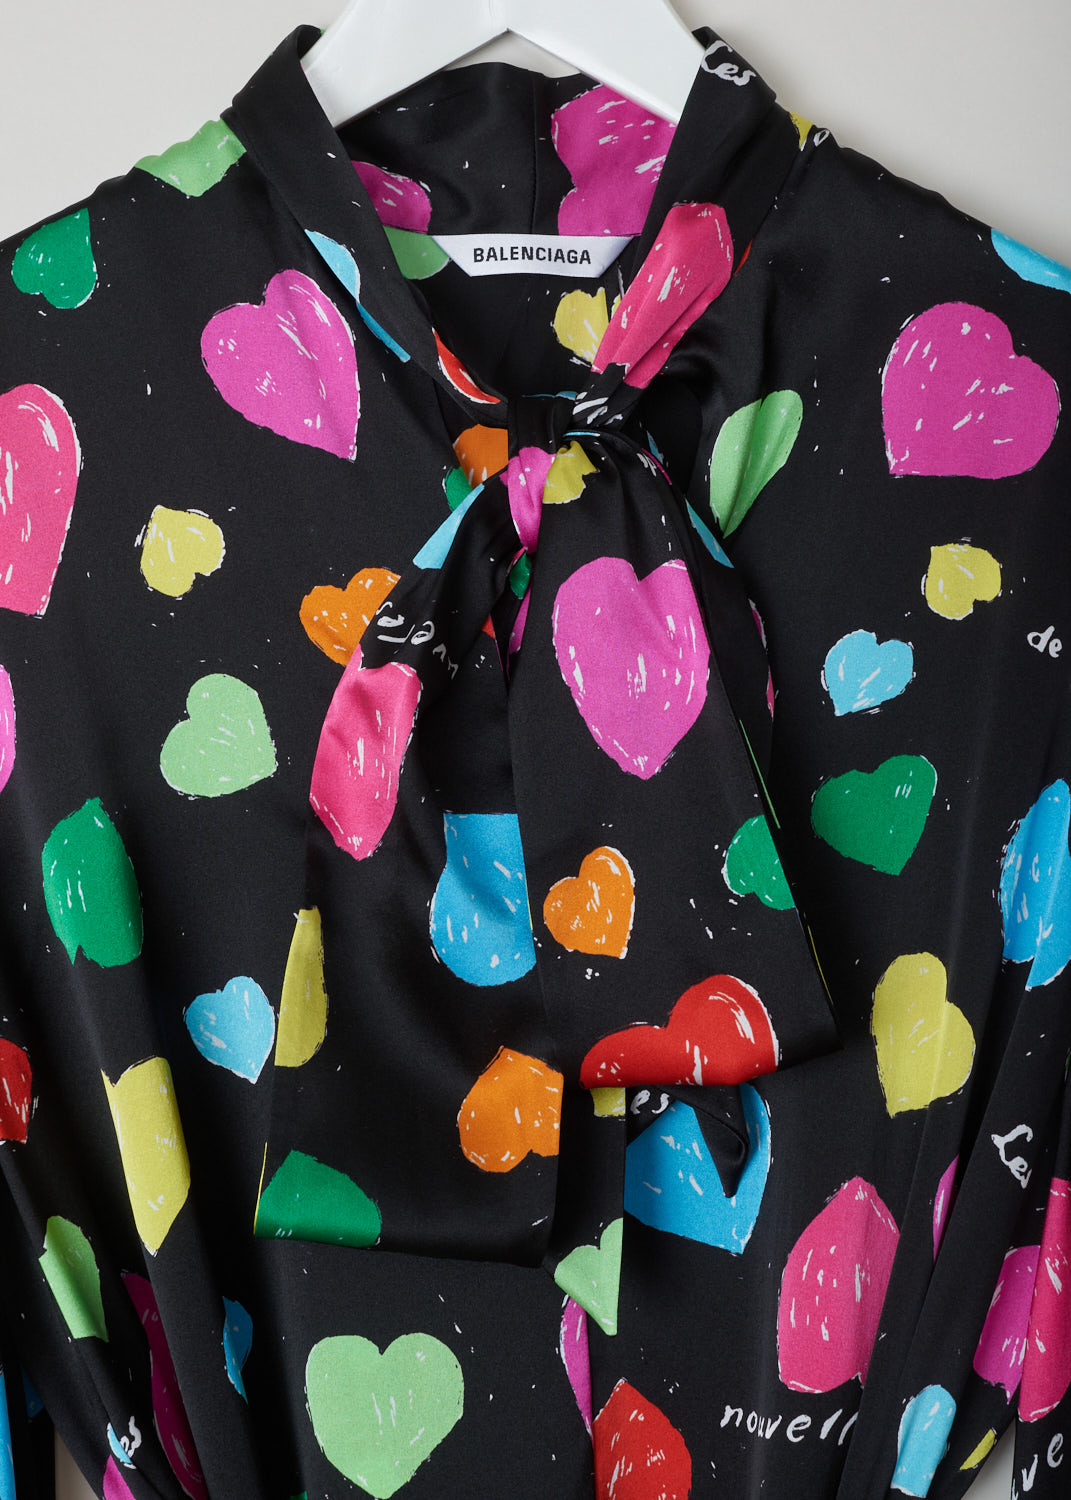 Balenciaga, Archive hearts print blouse, WL0_659088_TKL08_1000, black, pink, green, yellow, blue, print, detail 1, This blouse features an archive hearts and text print which stands out against the black silk background. It has a self tie collar and a belted waist. The blouse also has long sleeves with elasticated cuffs. 
